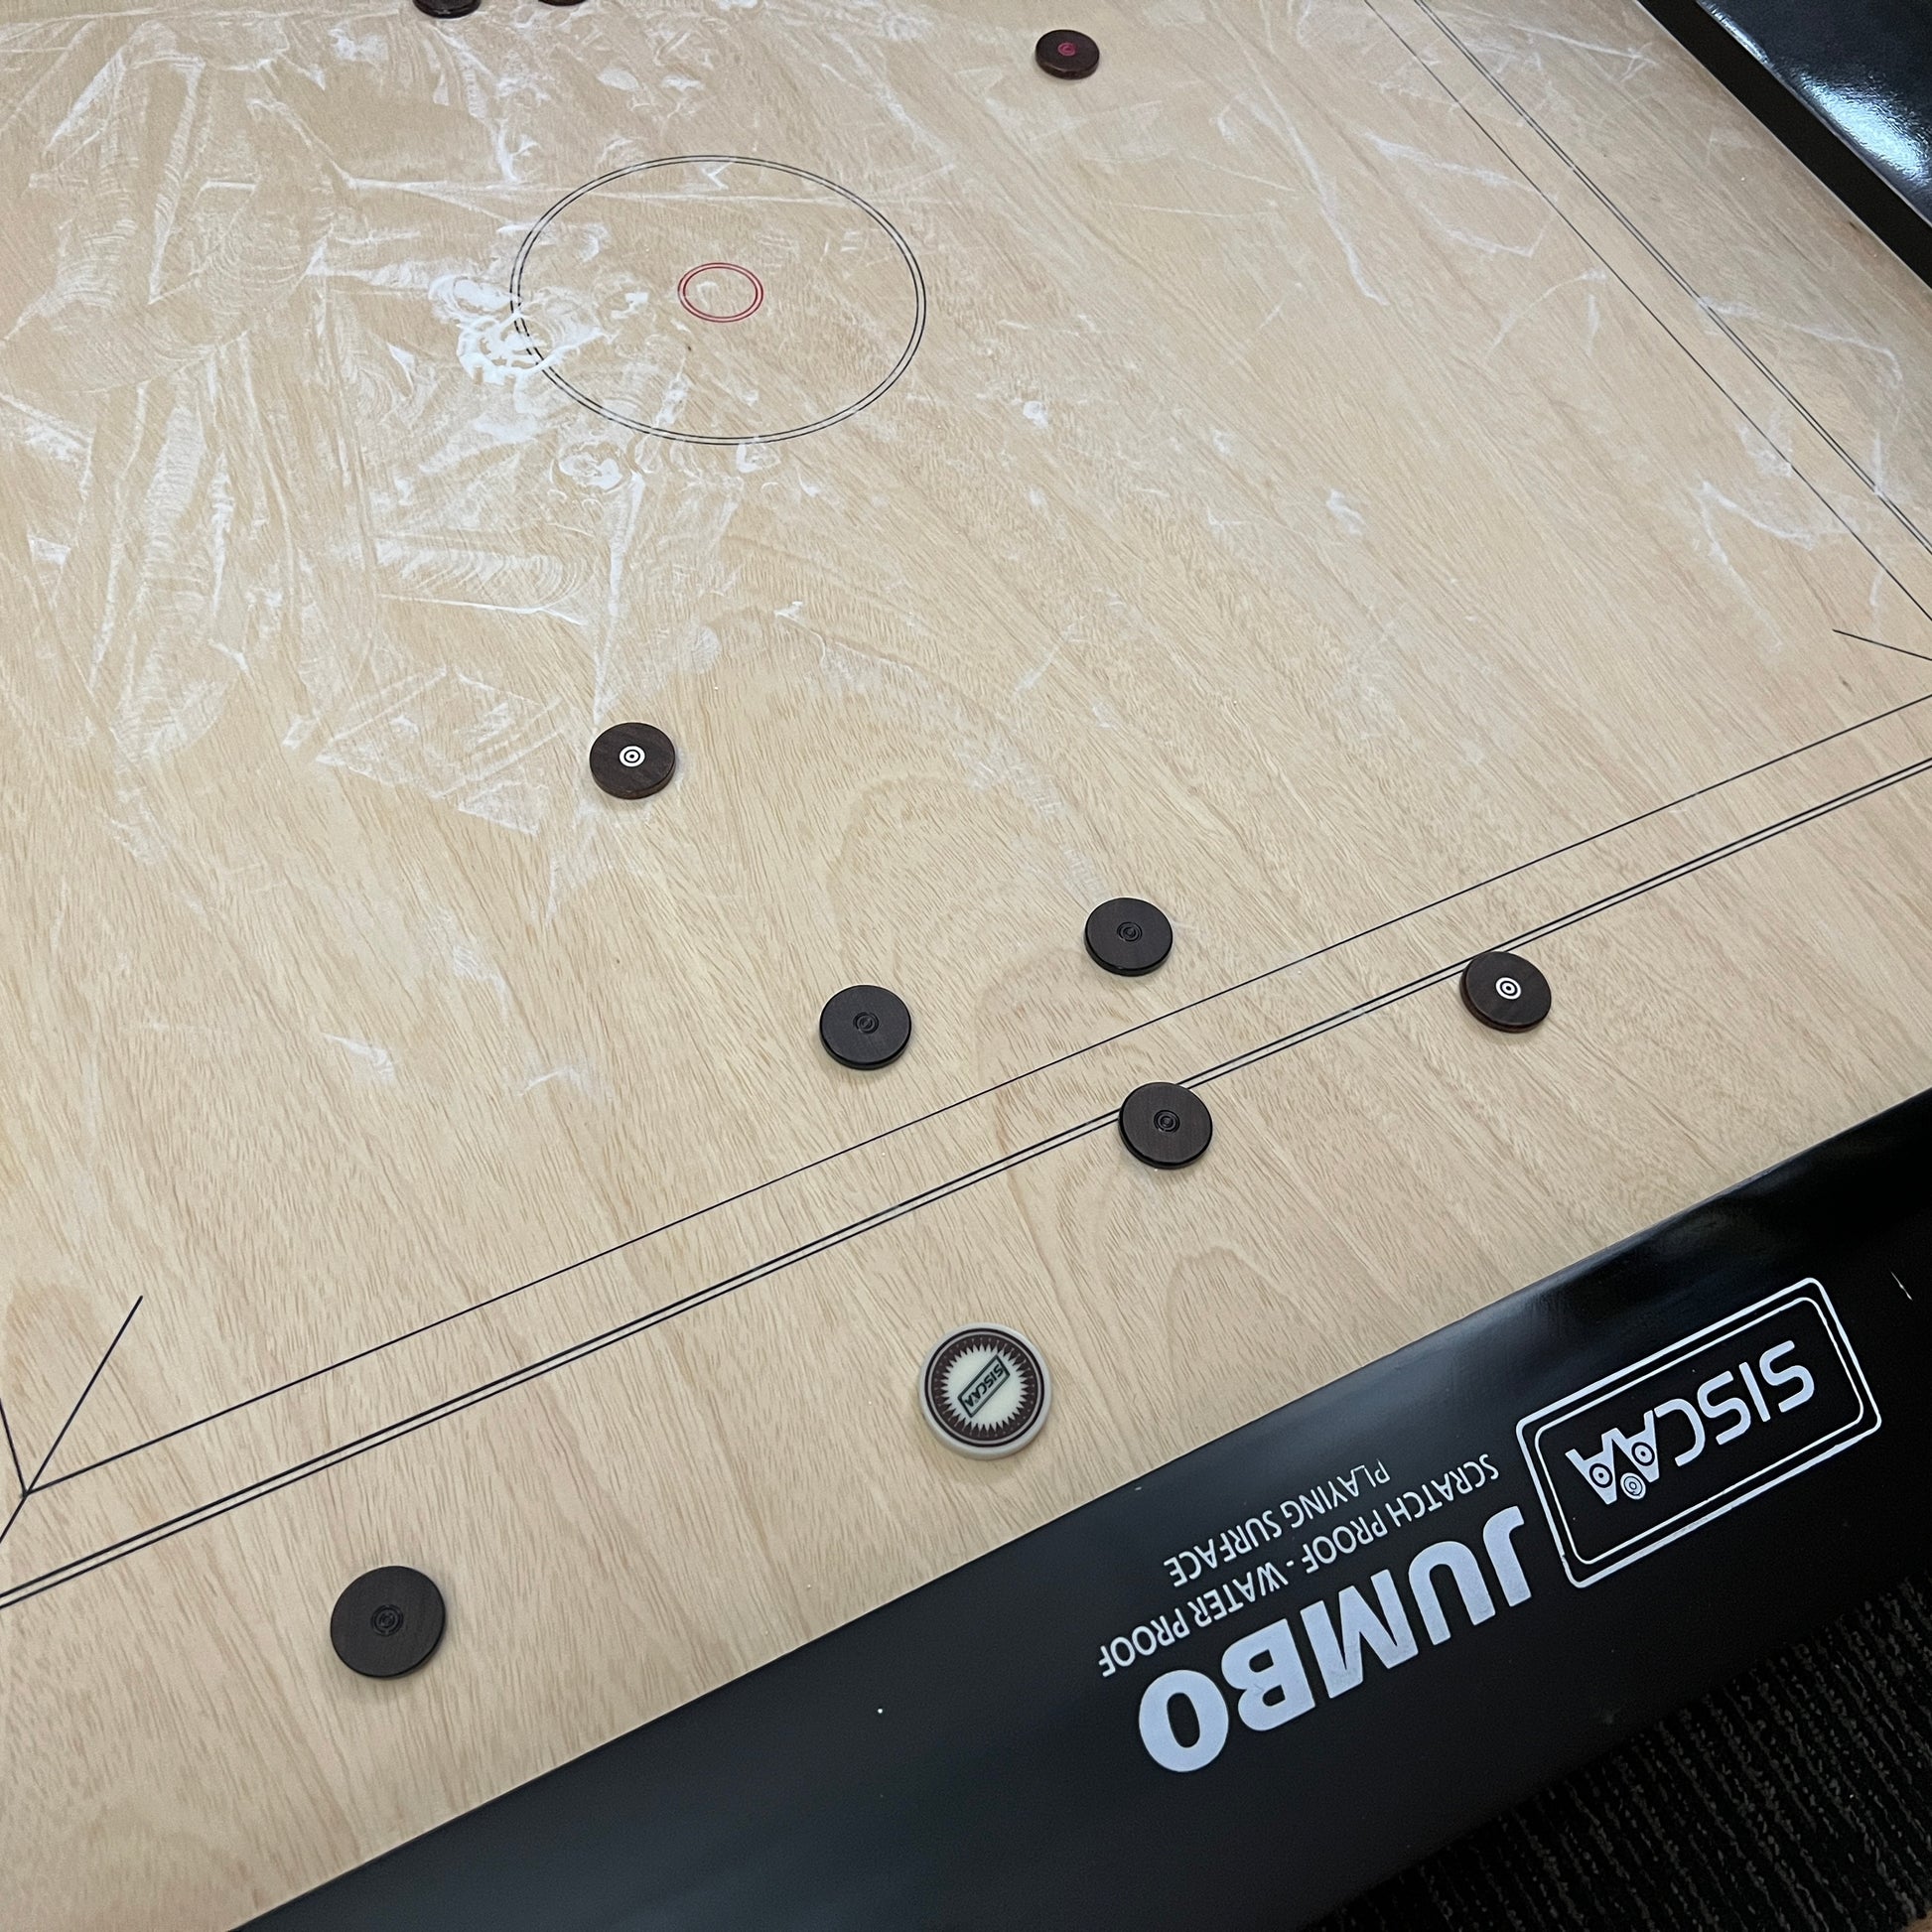 Black Ash 'Jumbo' high-end special edition carrom board by SISCAA, made of English Birchwood, 51x51 inches with a 41x41 inch playing area, 12mm sheet thickness, and 5-inch borders. Includes premium finish, fast rebound borders, heavy-duty back support, high-end coins, and 2 strikers.